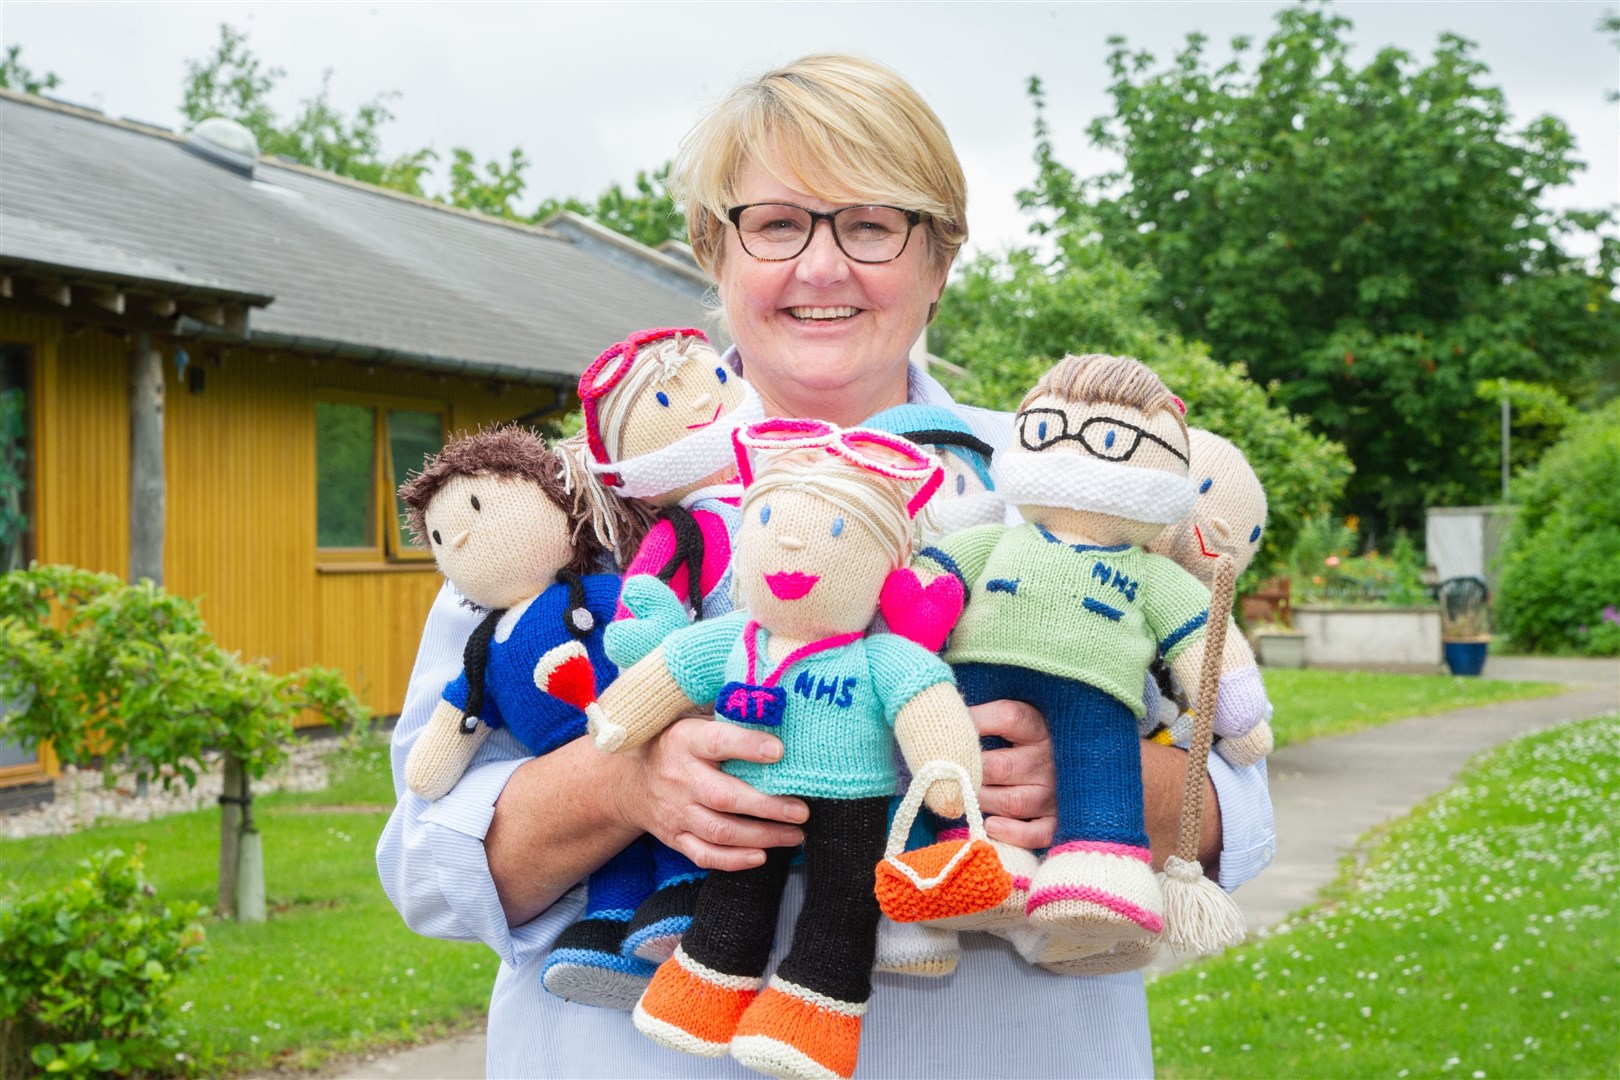 Karyn Sim,who works at The Oaks, has been busy knitting dolls of her fellow members of staff to raise money for the gardens at the care unit...Picture: Daniel Forsyth..